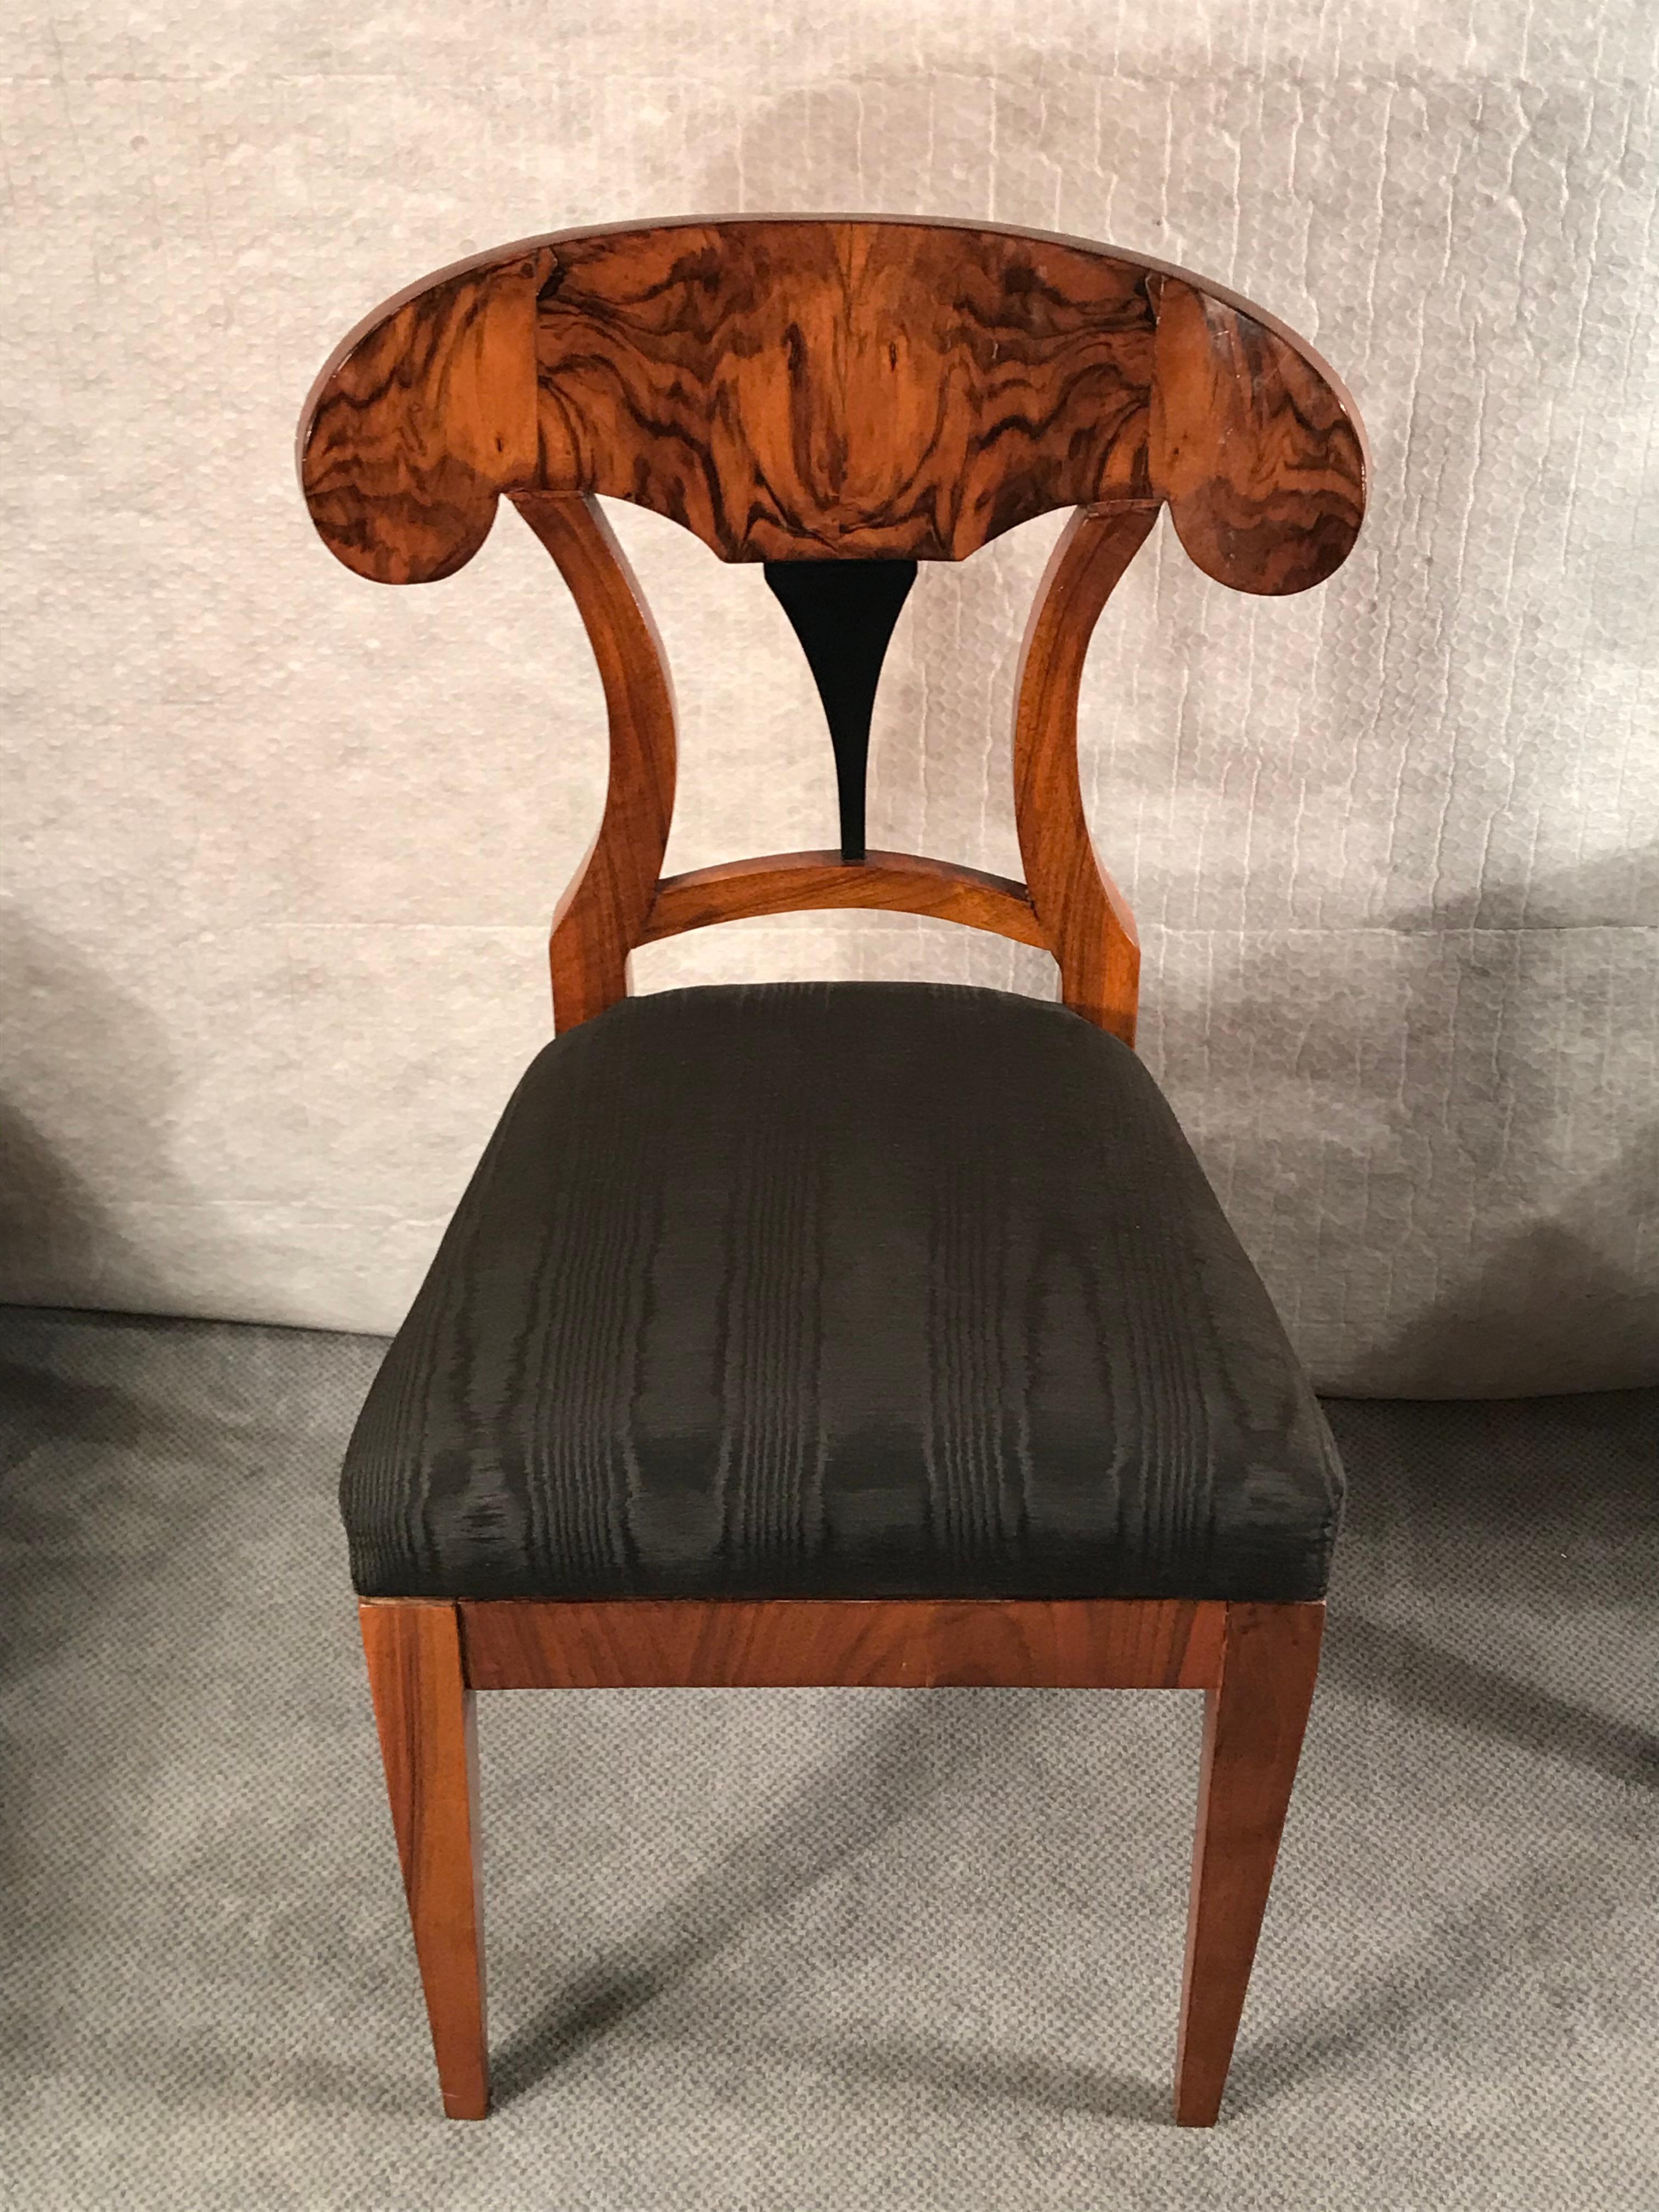 Set of four Biedermeier chairs, South Germany 1820.

These original beautiful Biedermeier chairs have a pretty shovel back with an ebonized detail. They are in very good condition. The chairs ship from Germany and include shipping costs and duty